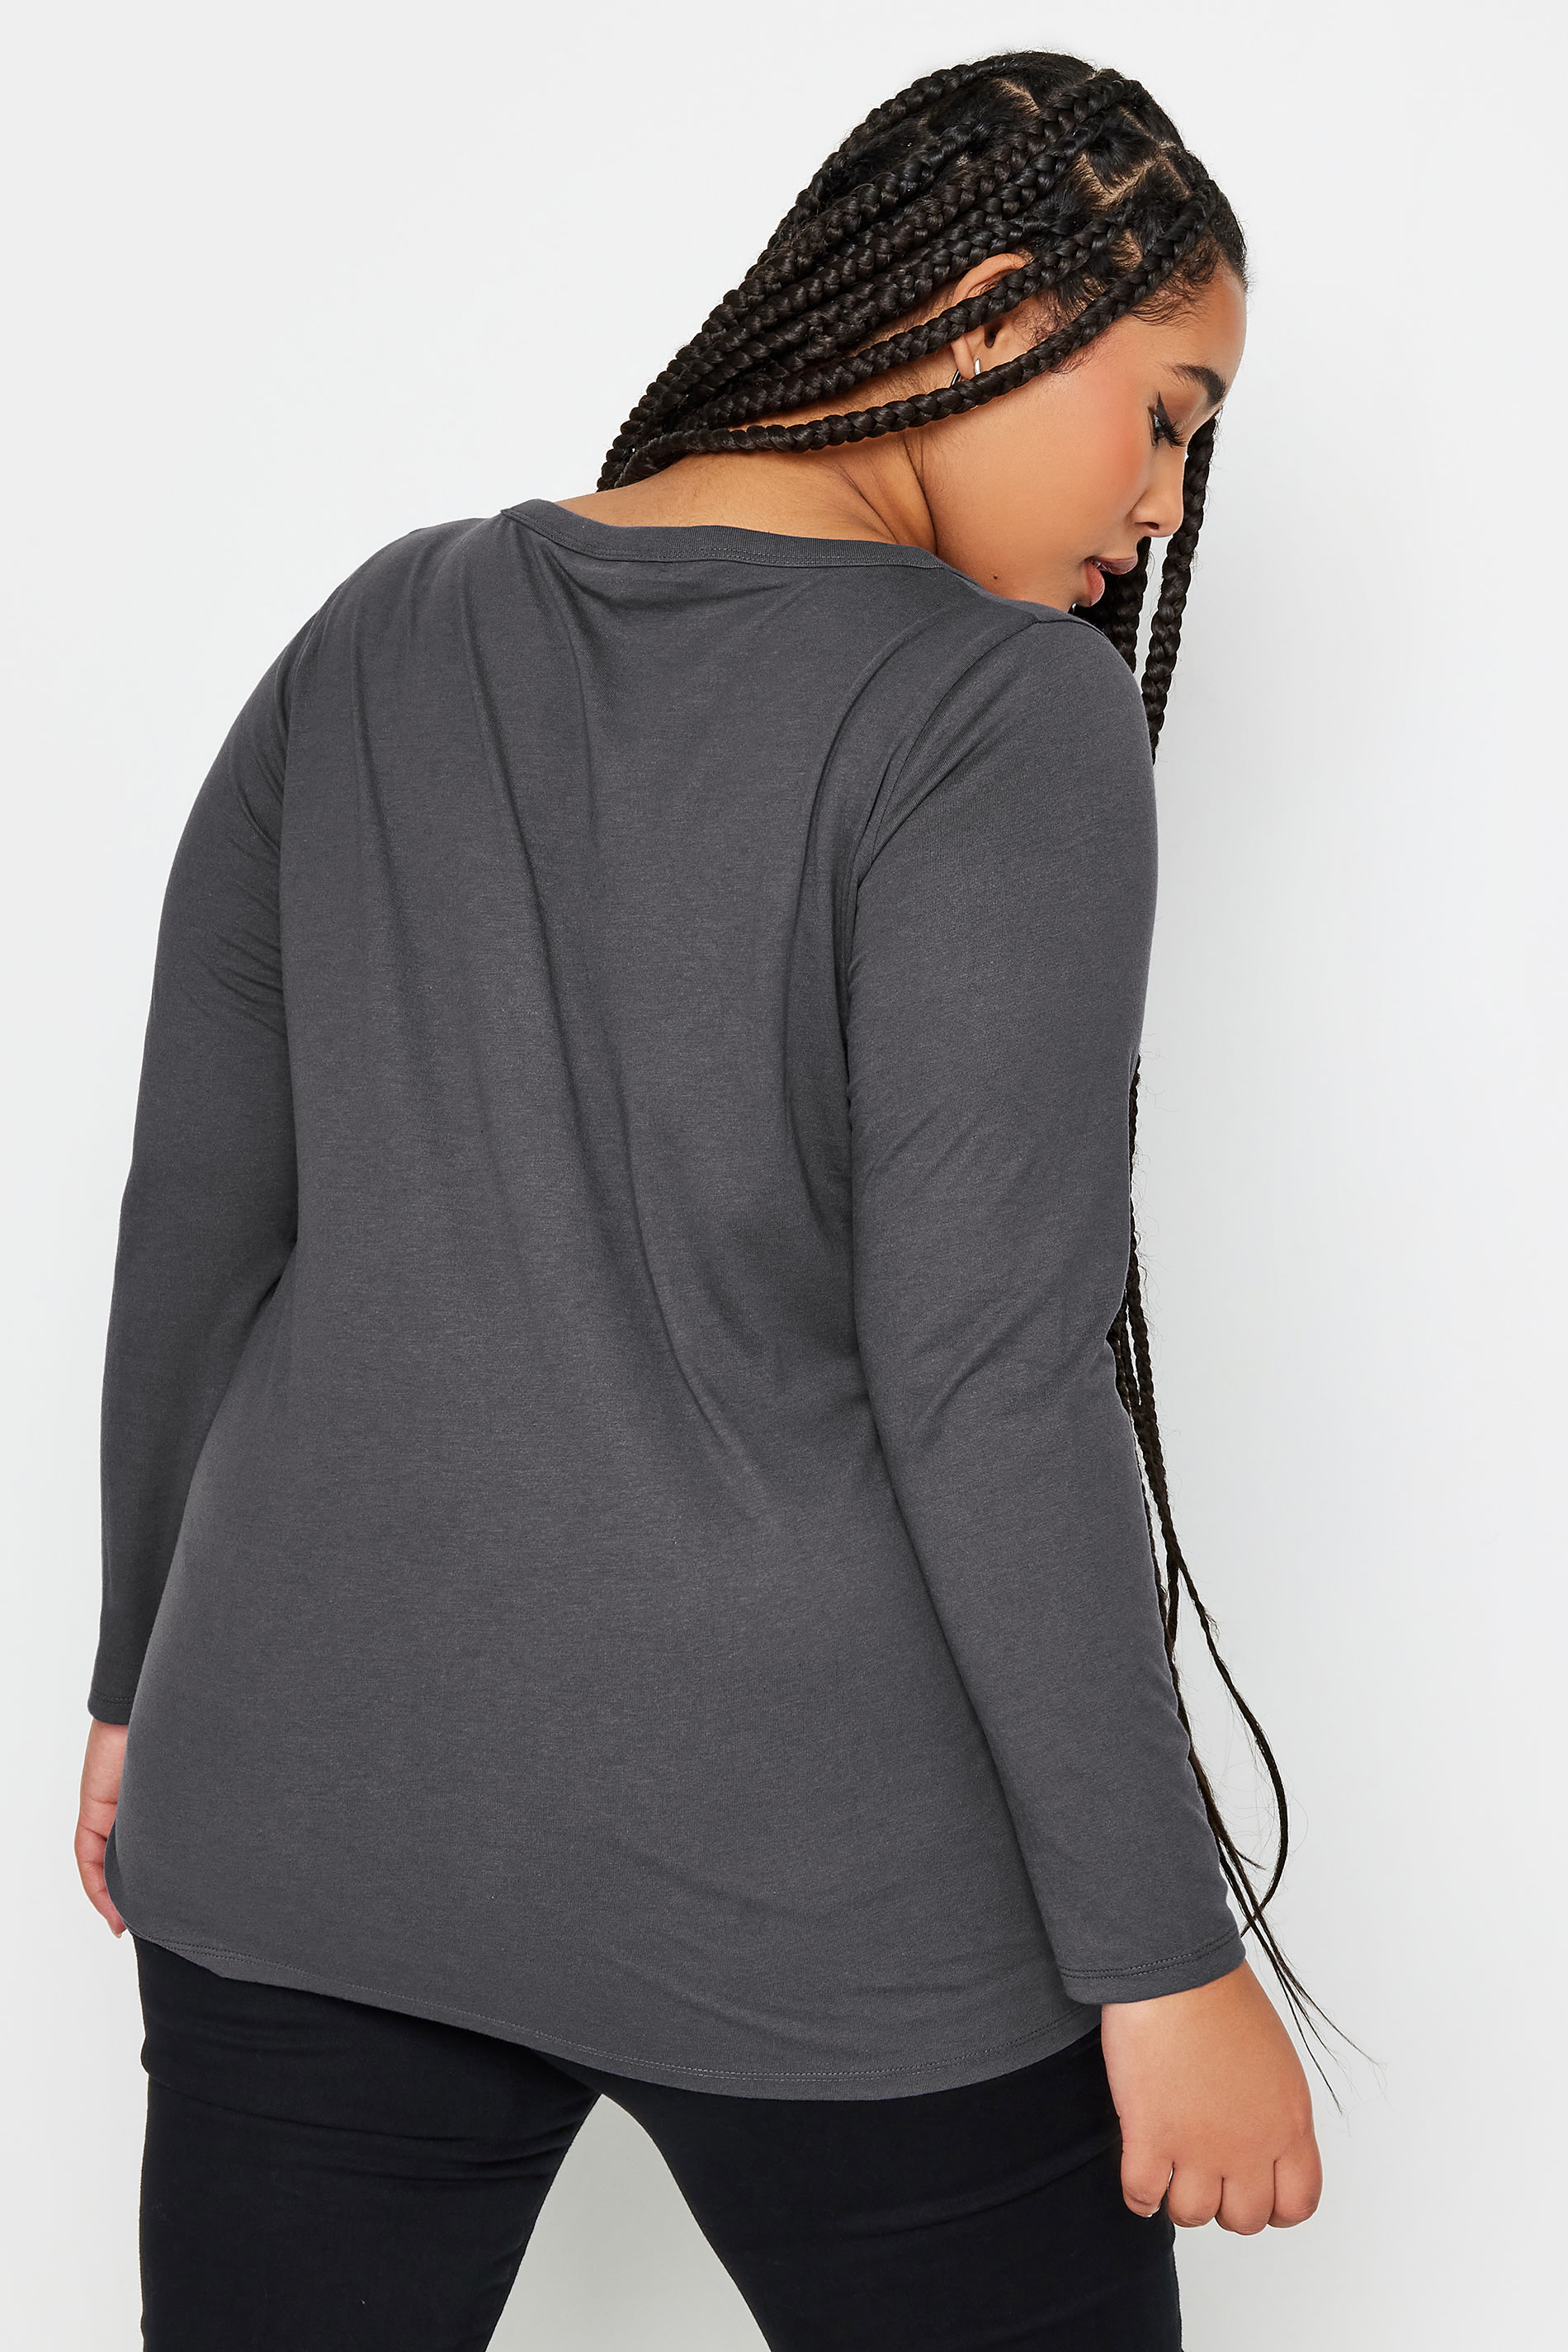 YOURS Plus Size Grey Long Sleeve Top | Yours Clothing 3